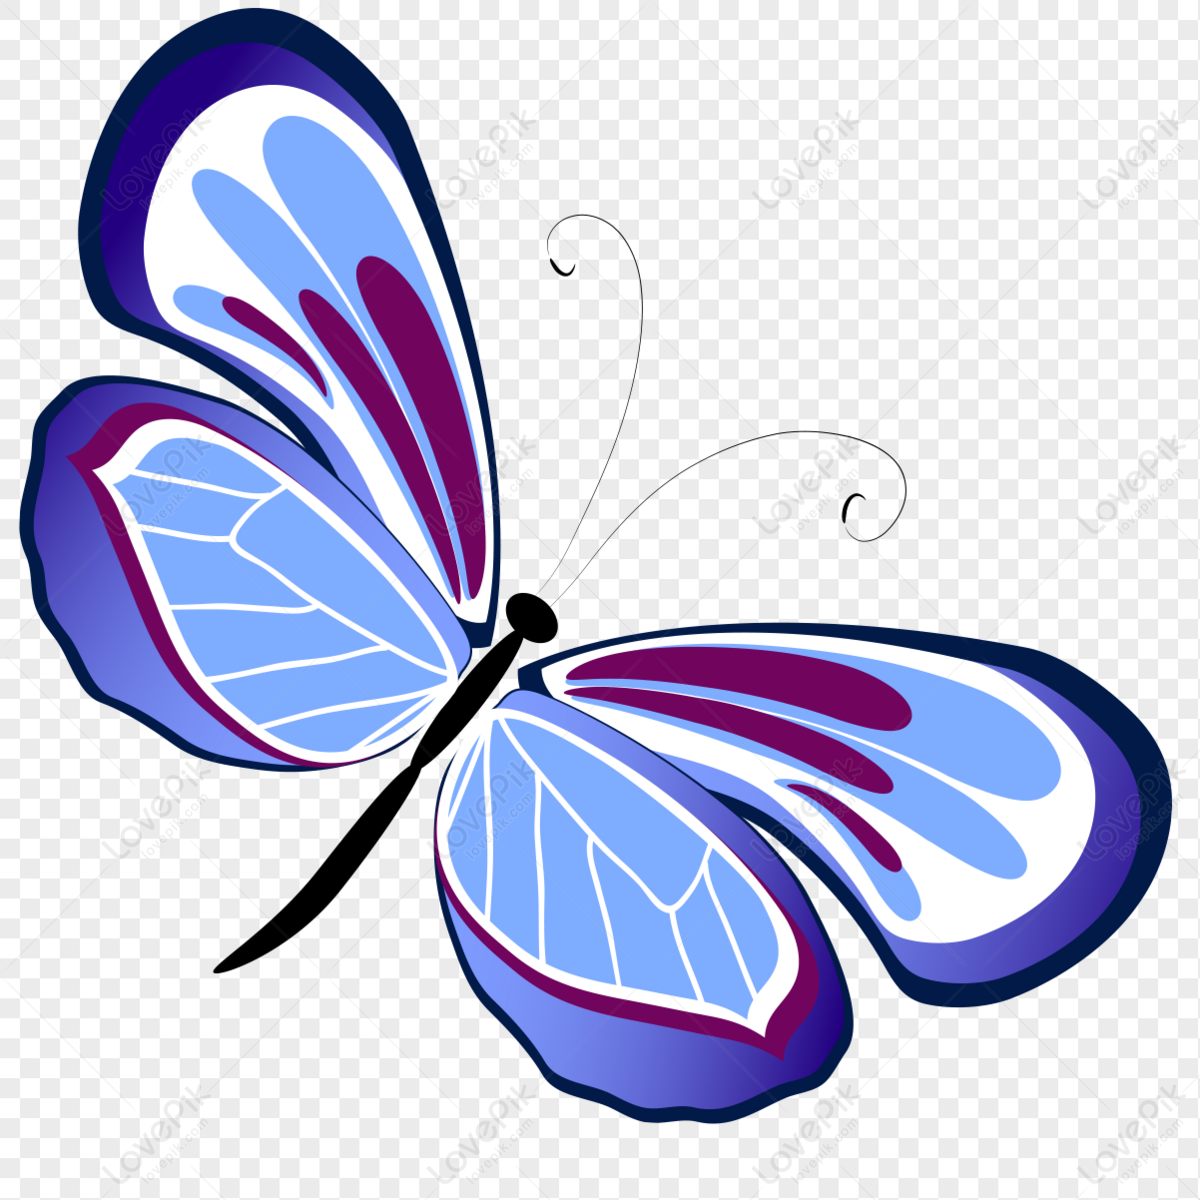 Blue Butterfly PNG Transparent Background And Clipart Image For Free  Download - Lovepik | 400212100